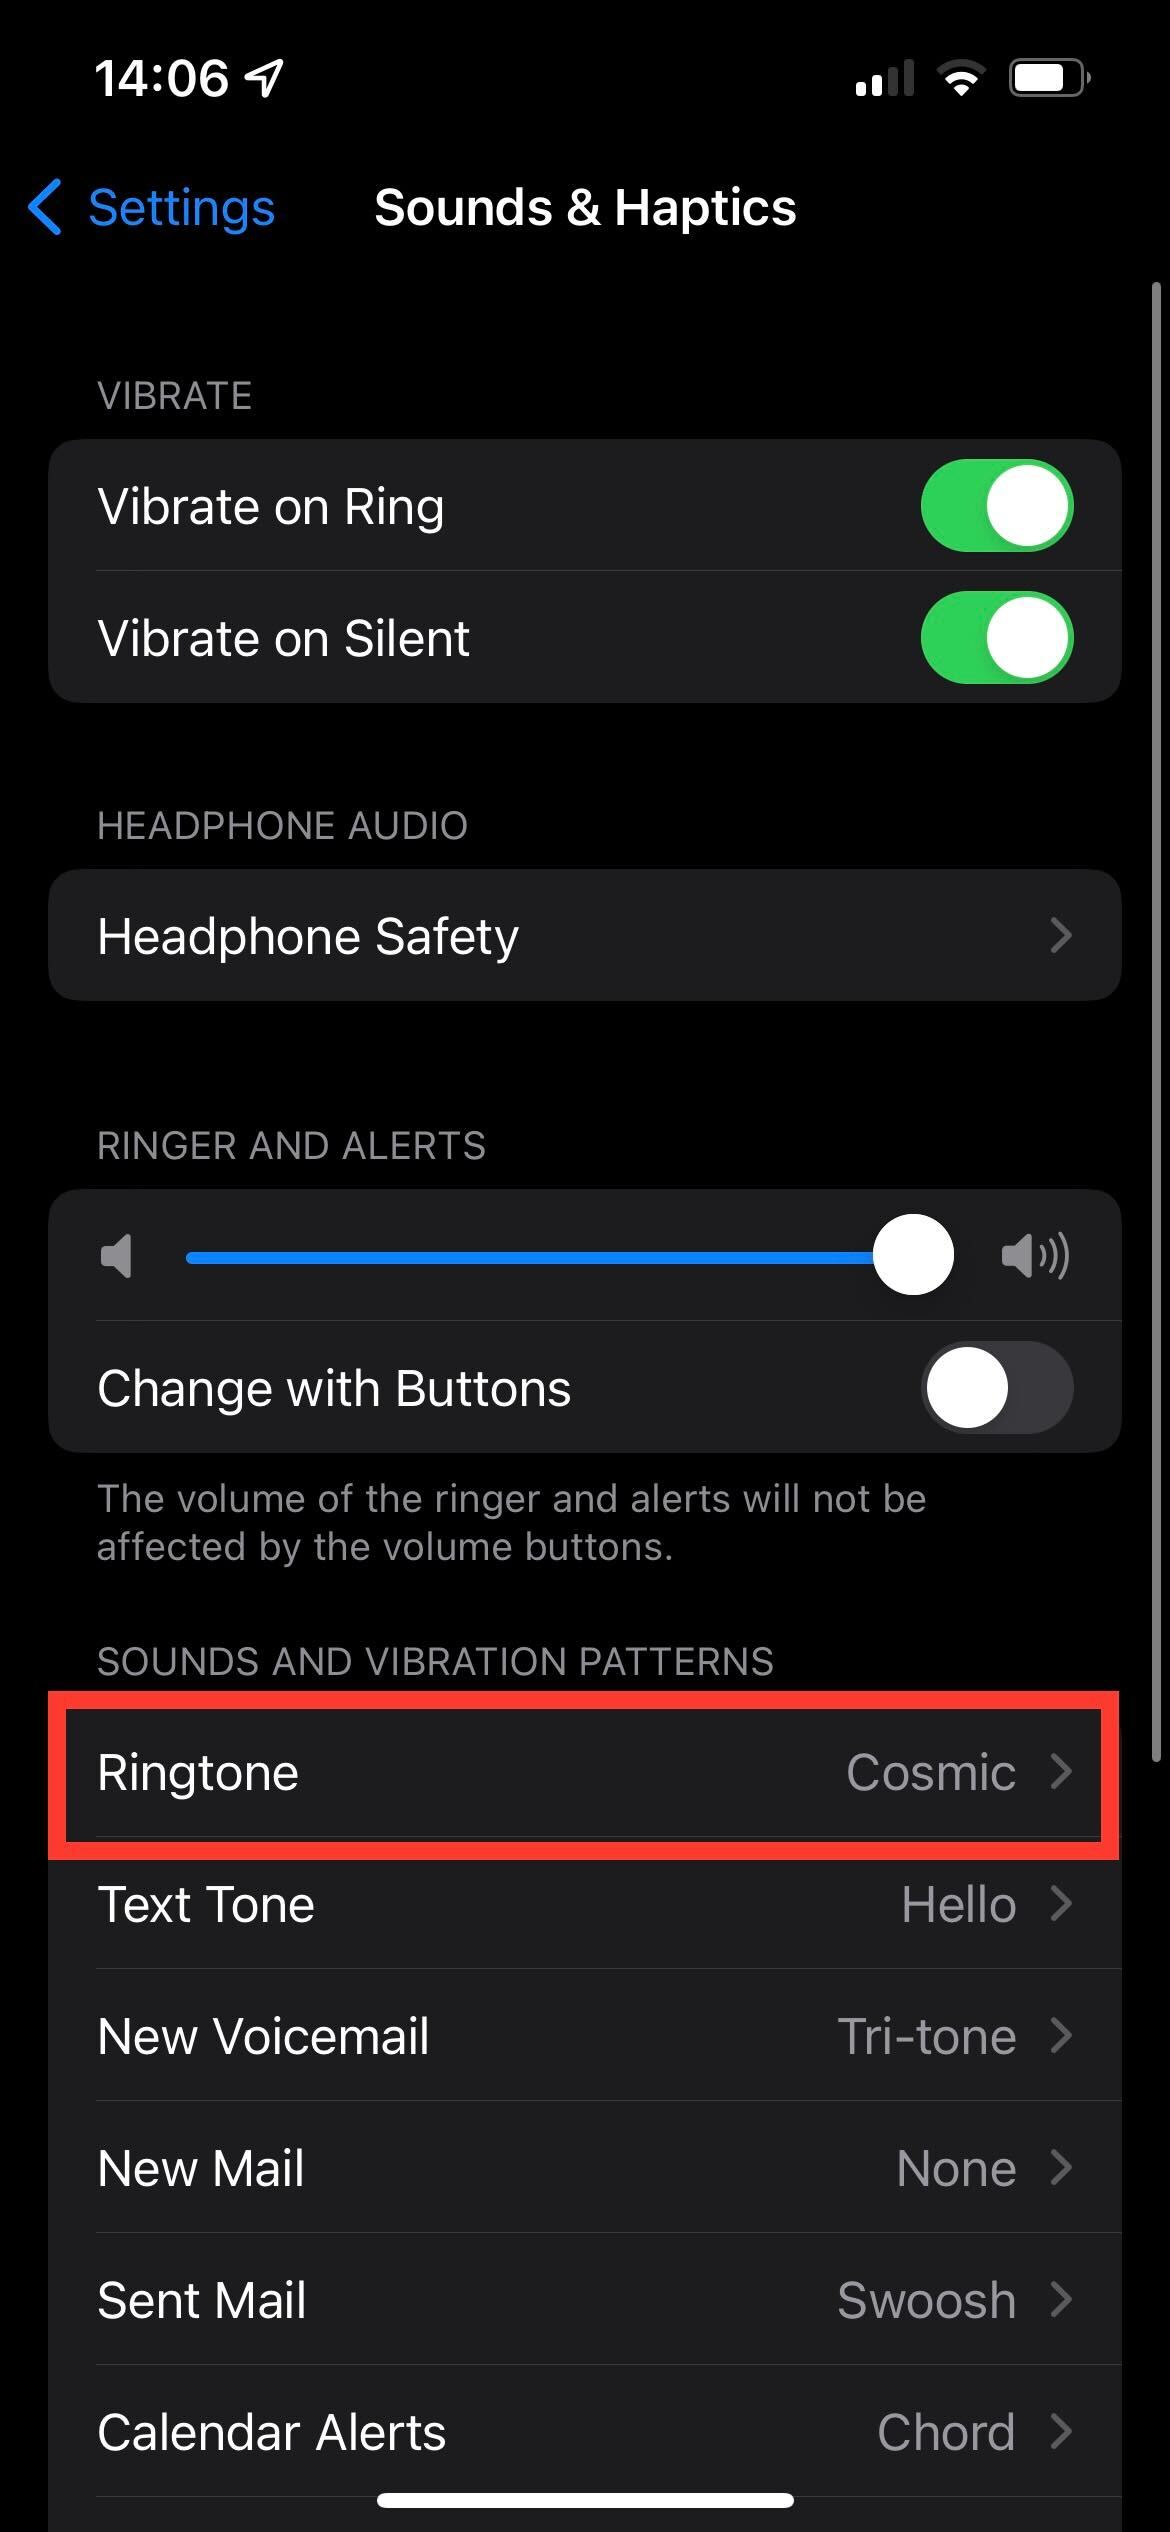 Click on the ringtone button to continue